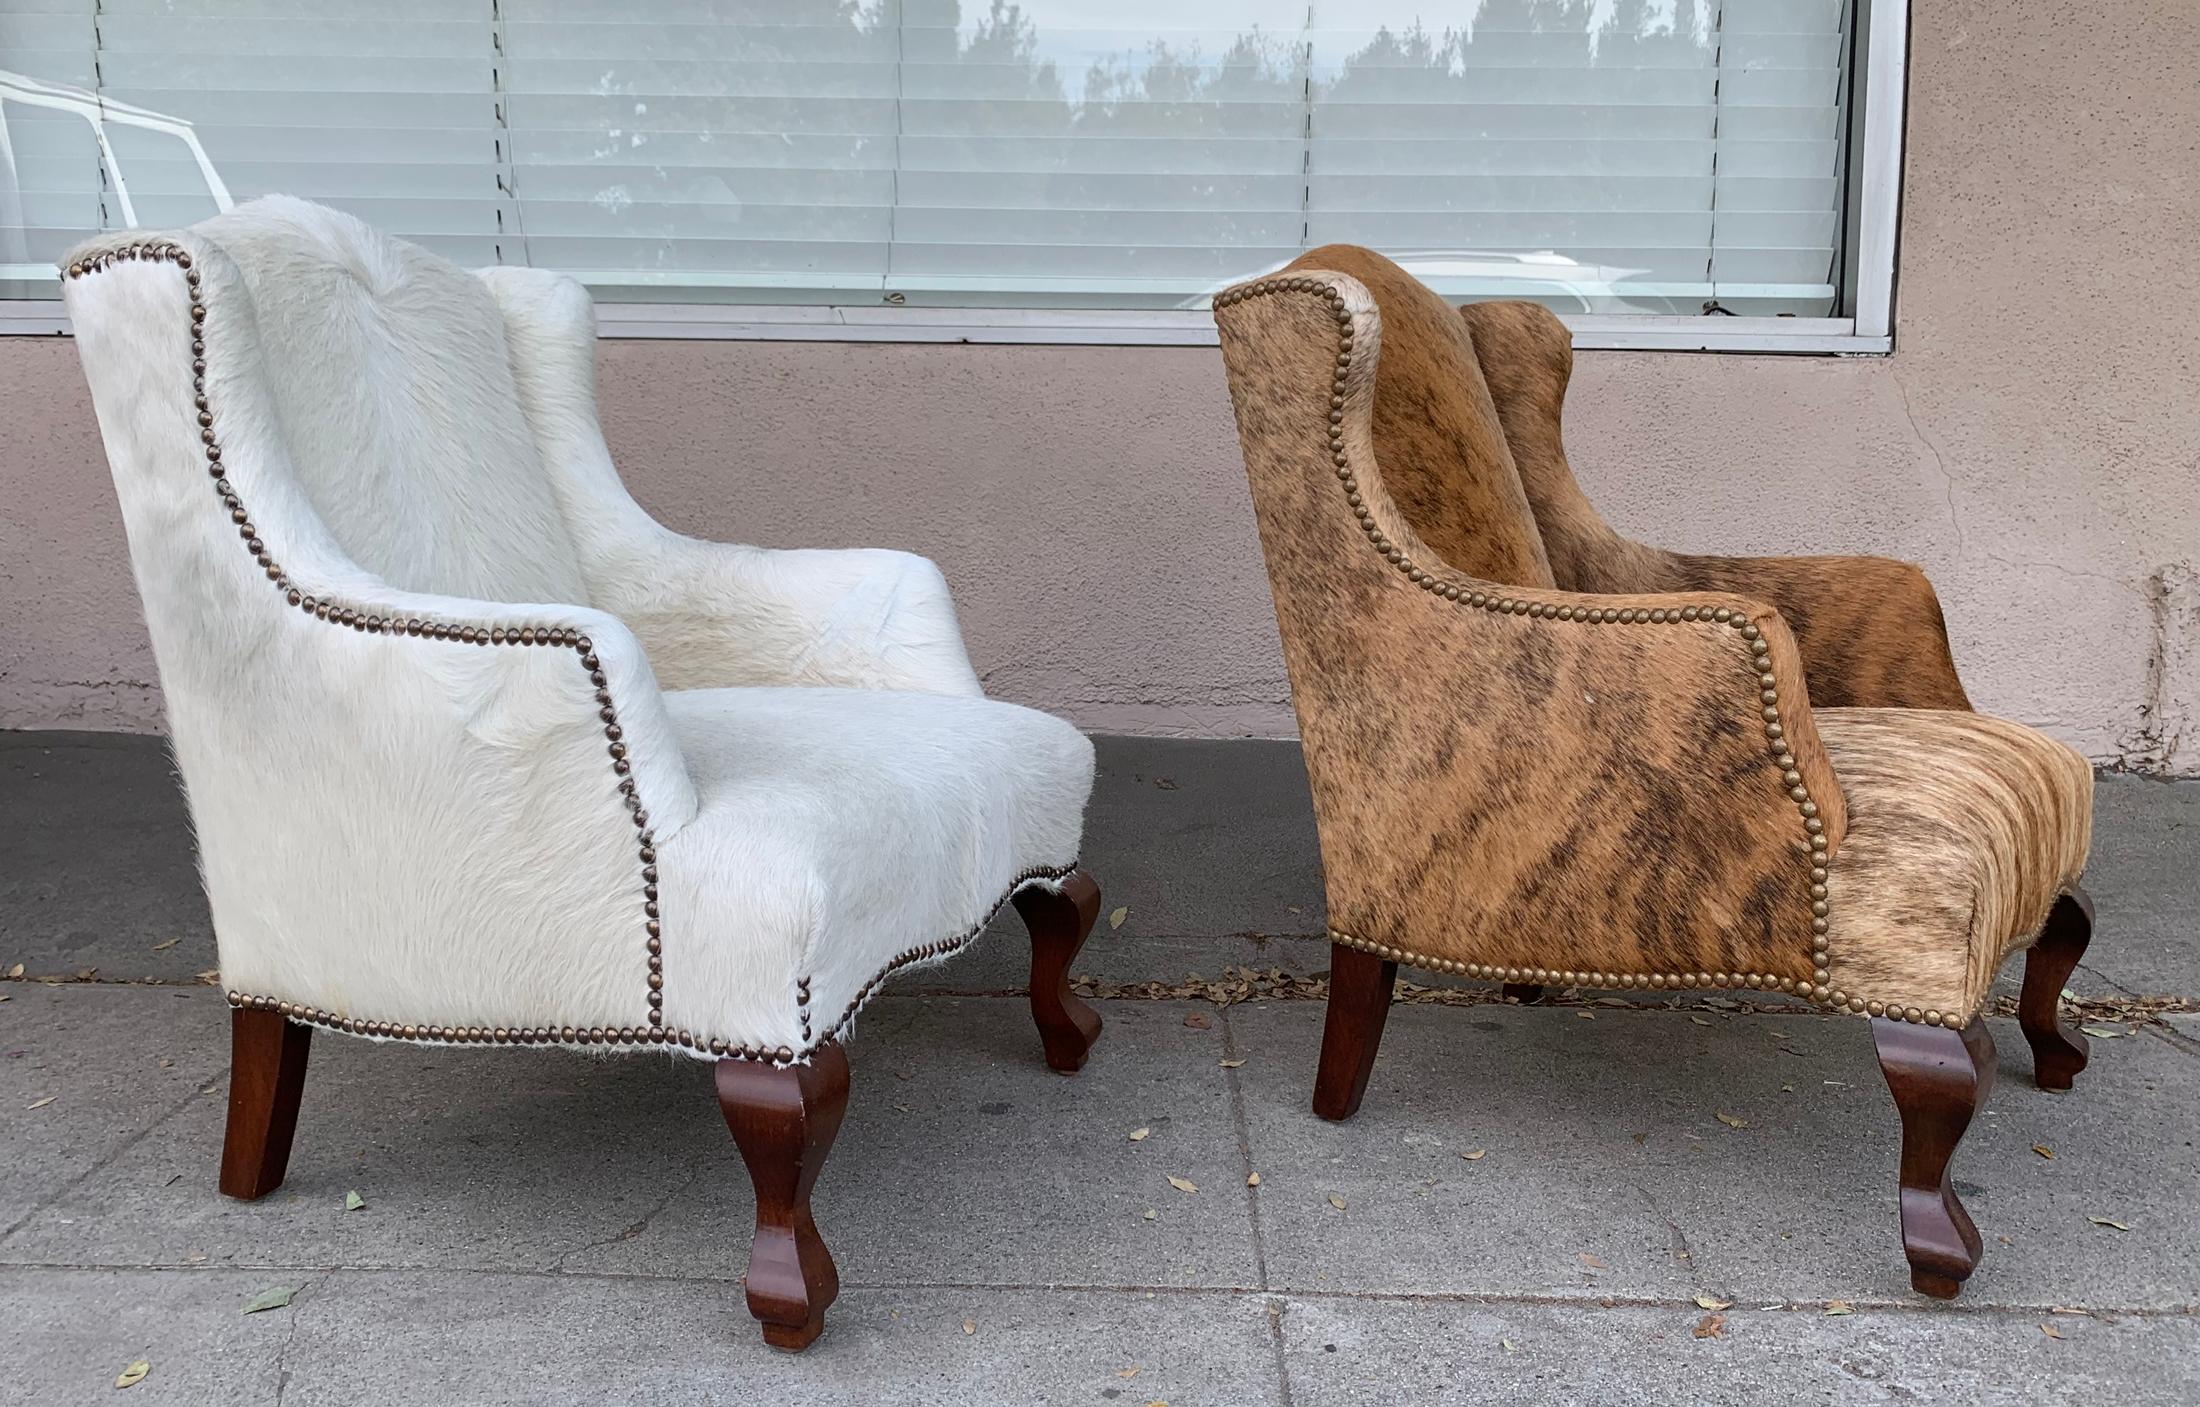 Beautiful pair of wingback chairs, one upholstered in white cowhide leather and 1 upholstered in brown cowhide leather, newly upholstered, the chairs have cabriole style legs in dark mahogany wood.
Measurements:
28.5” high x 20” wide x 24.5” deep